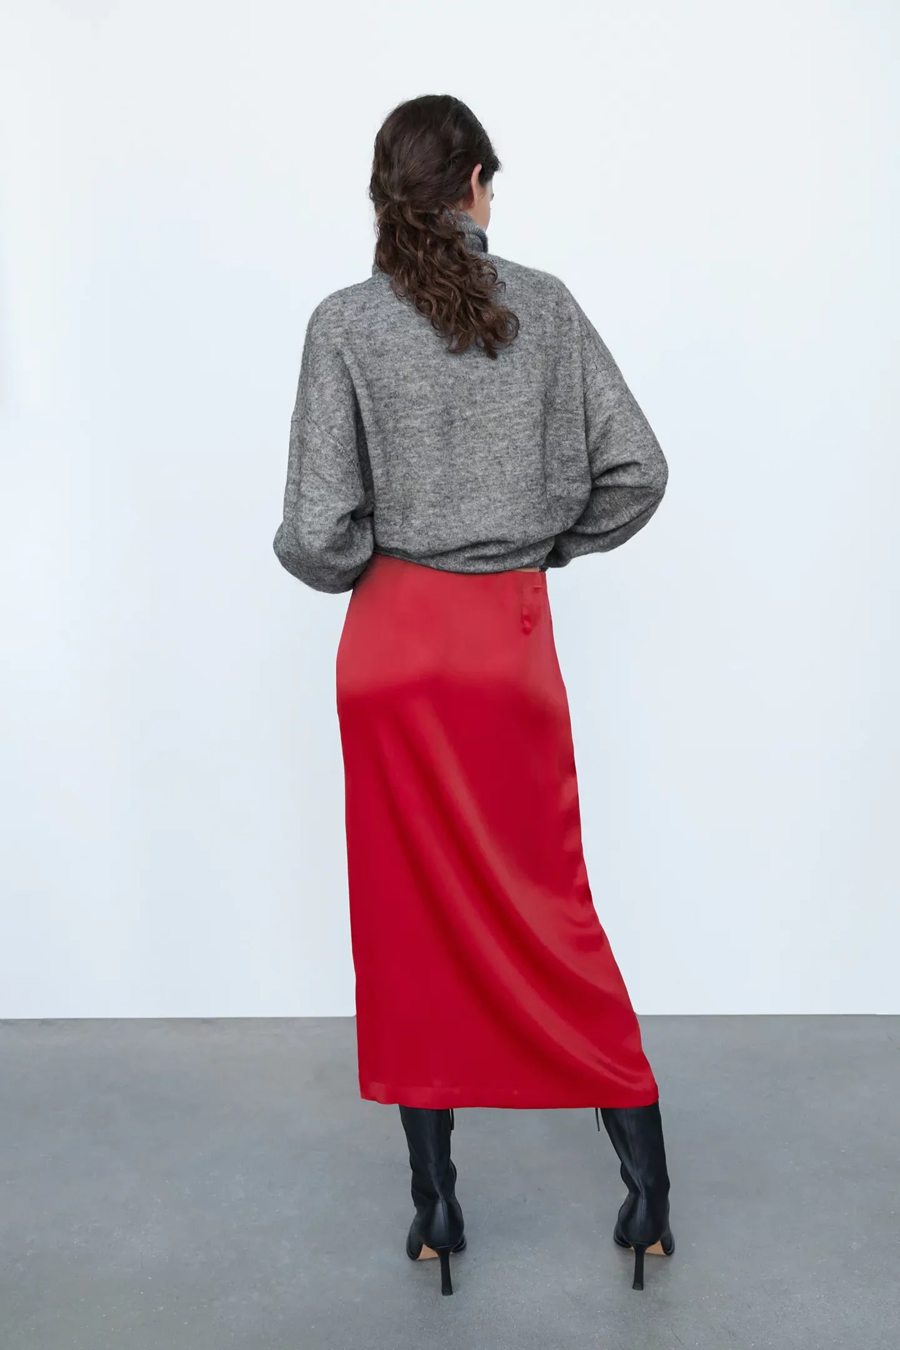 Fashion Red Silk Satin Micropleated Skirt,Skirts